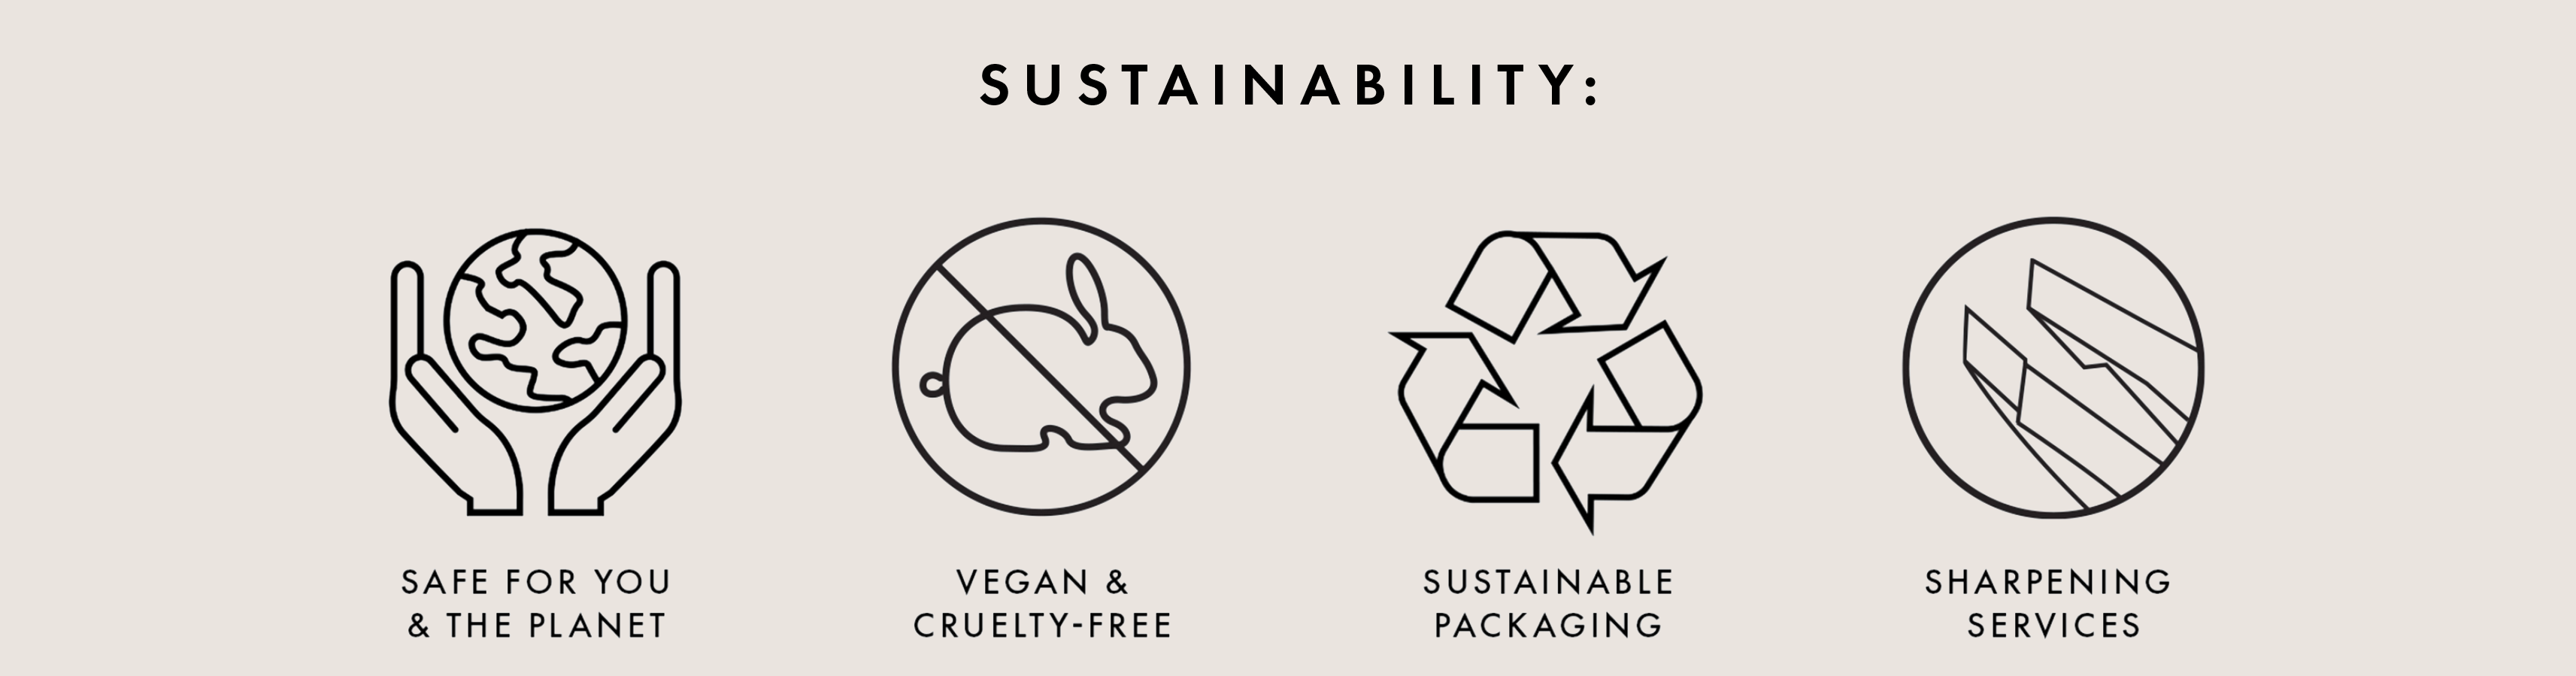 Safe for you and the planet, vegan & cruelty free, sustainable packaging, sharpening services